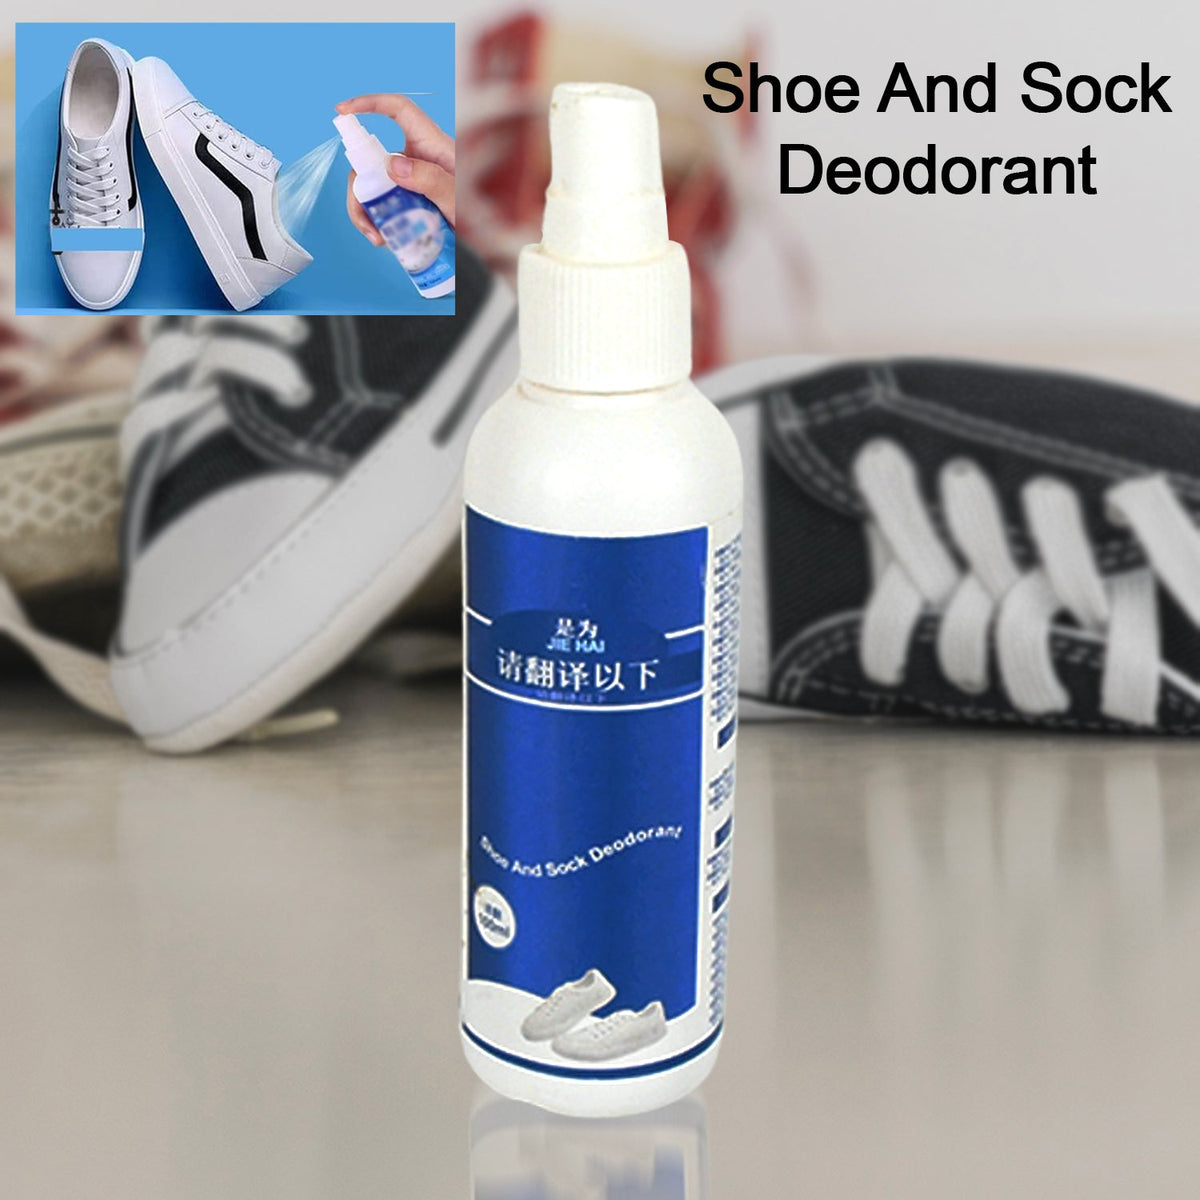 17686 Deodorant Spray for Shoes & Socks, Shoe Deodorizer Spray, Shoe Odor Eliminator Spray, Sneaker & Shoe Deodorant, Freshness for Work Shoes, Safety Shoes, Sports Shoes & More (100 ML)